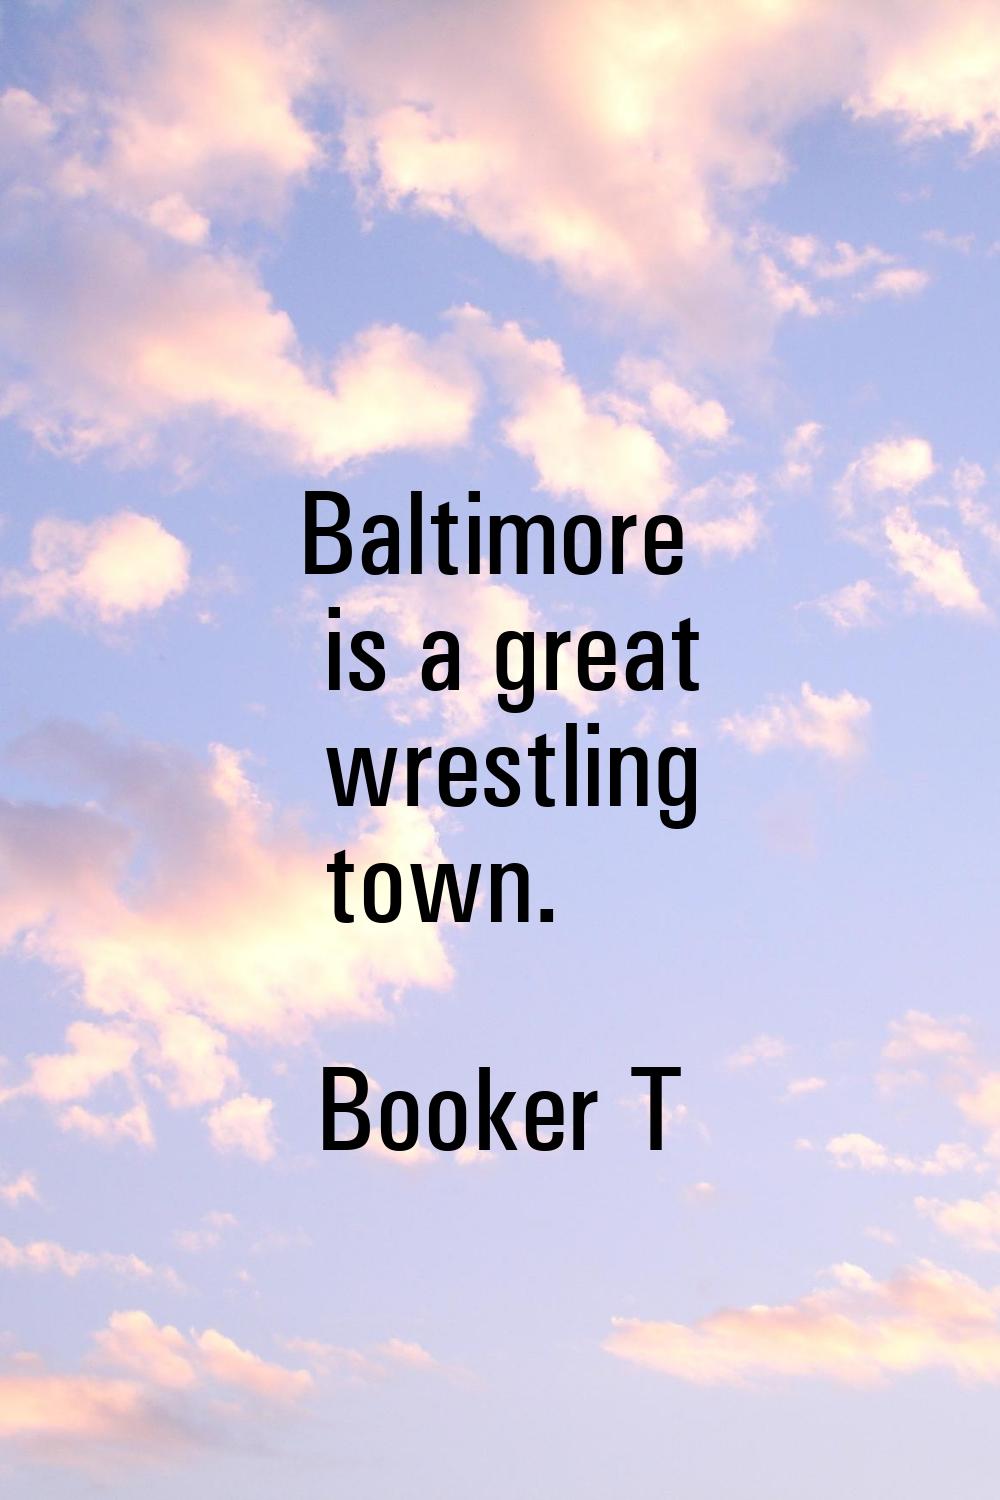 Baltimore is a great wrestling town.